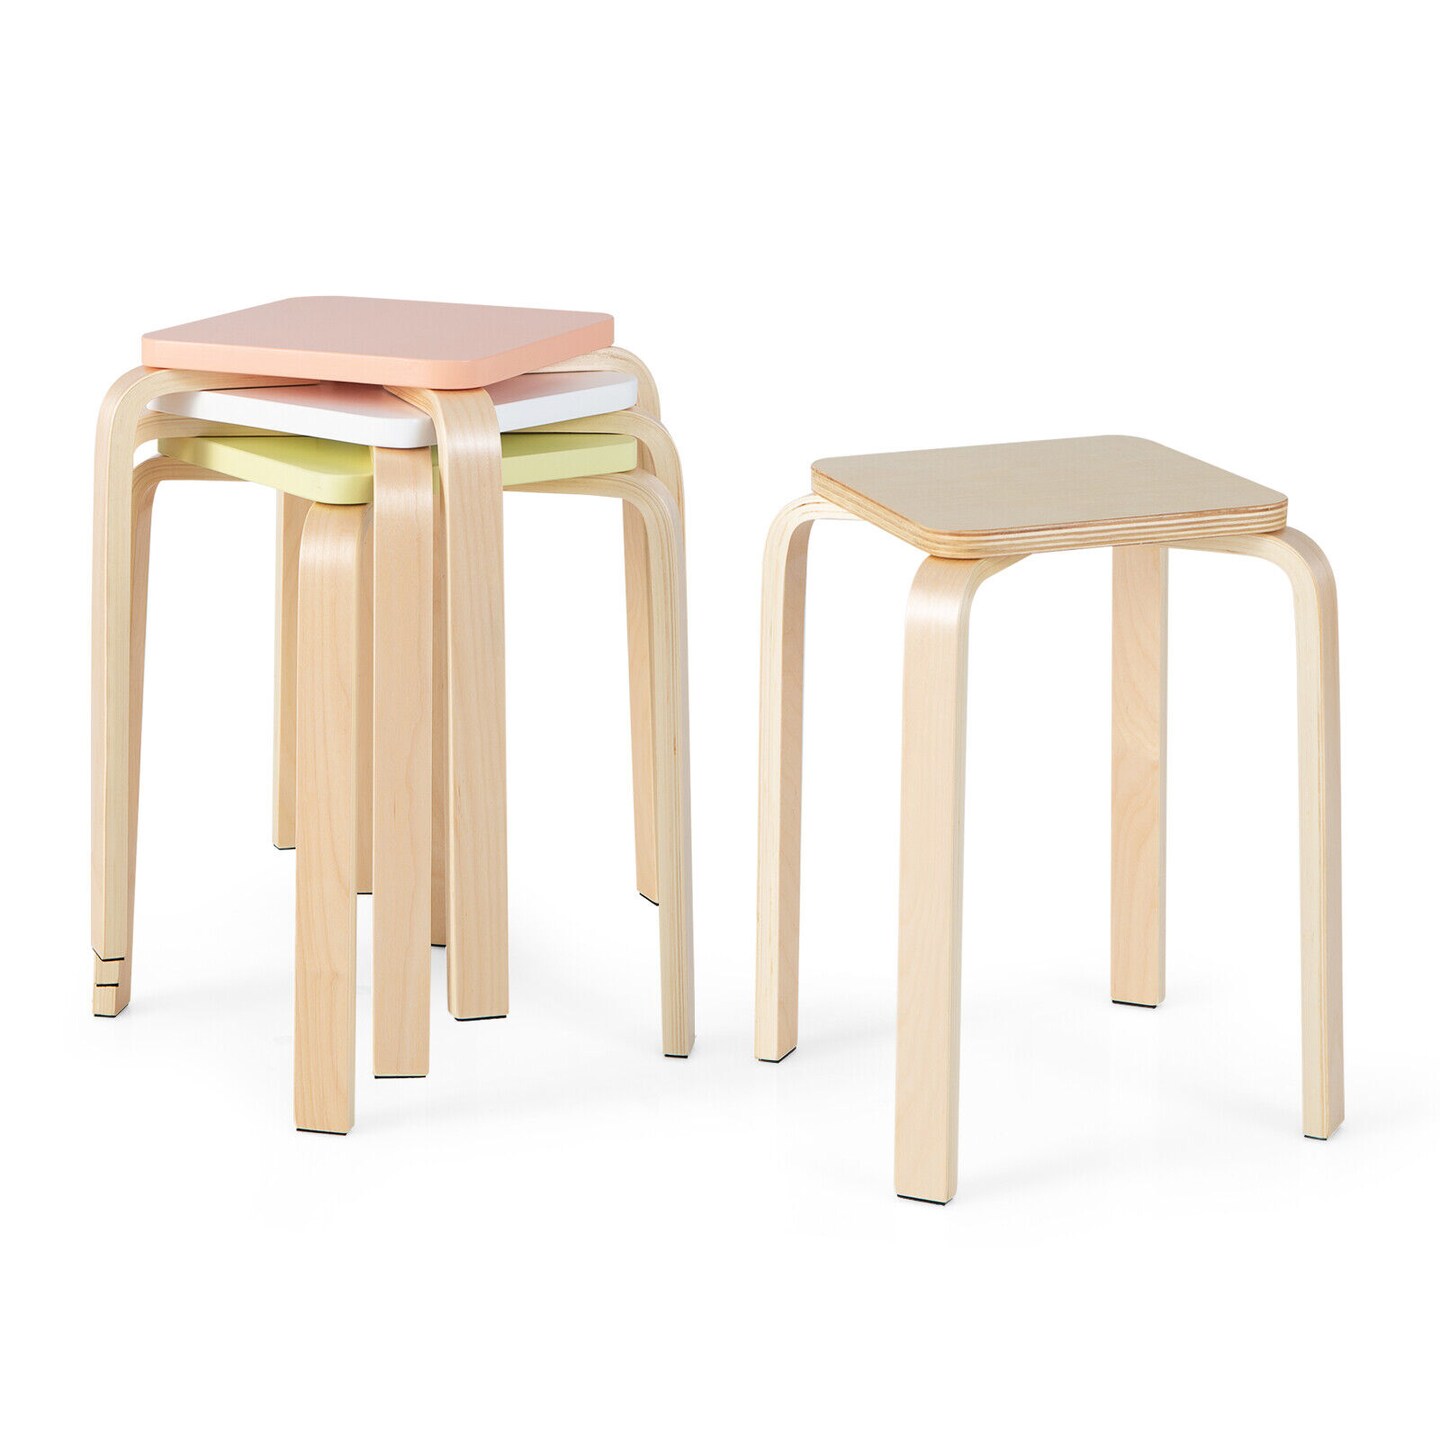 Stackable Stools Set of 4 with Square Top and Rounded Corners - 14" x 14" x 18"